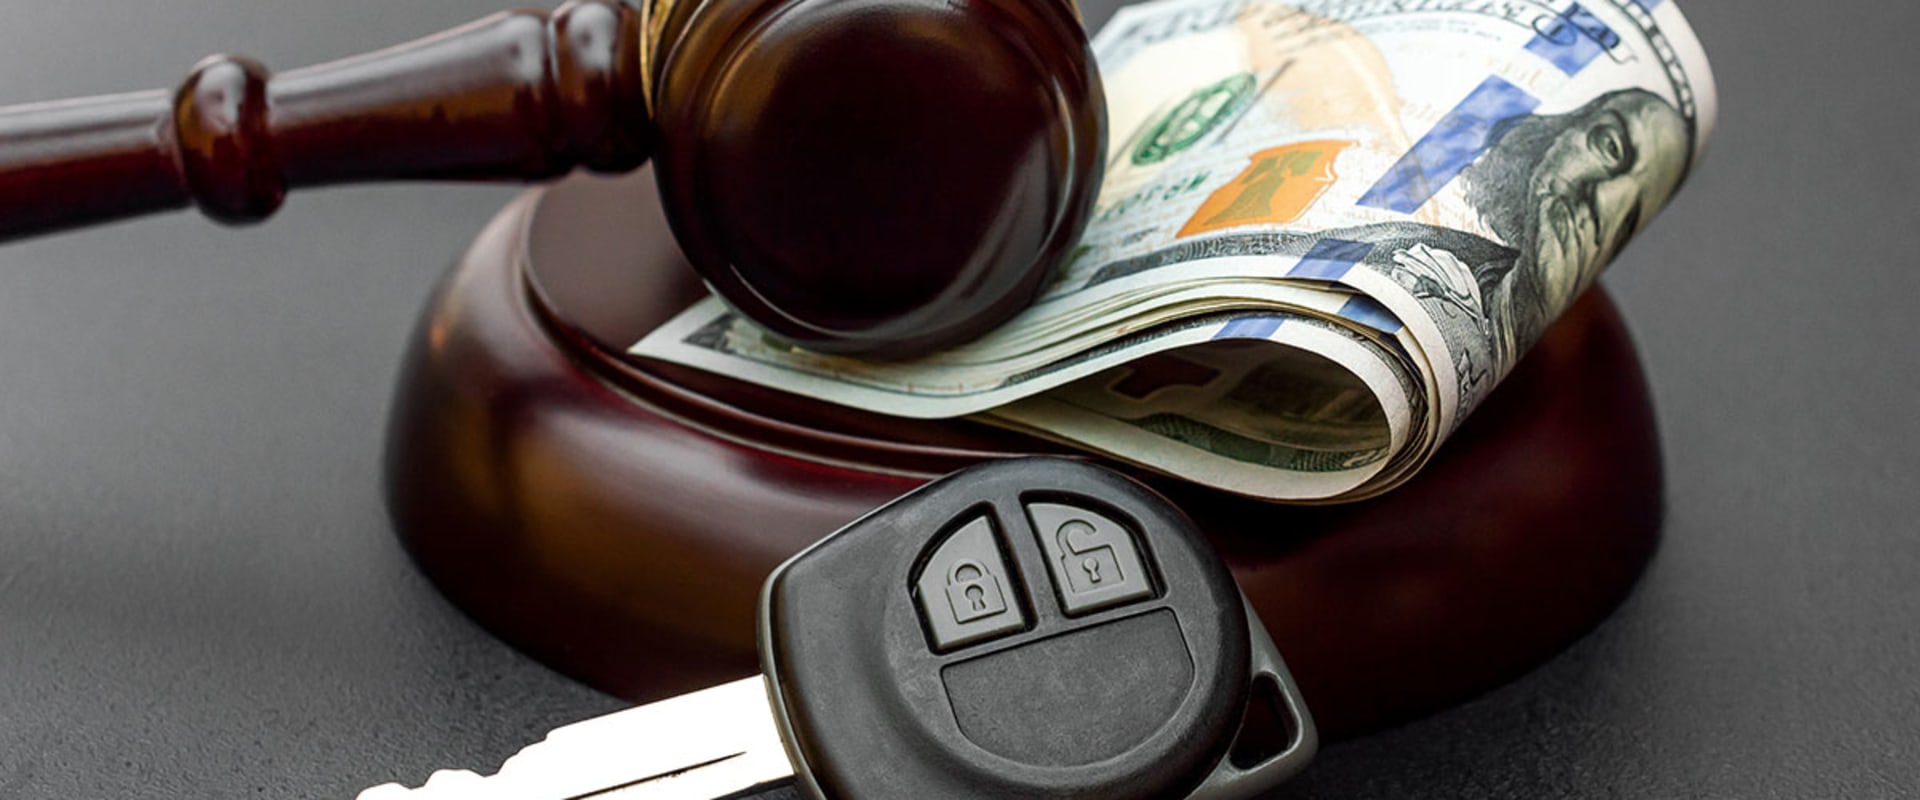 How much does a good dui lawyer cost?